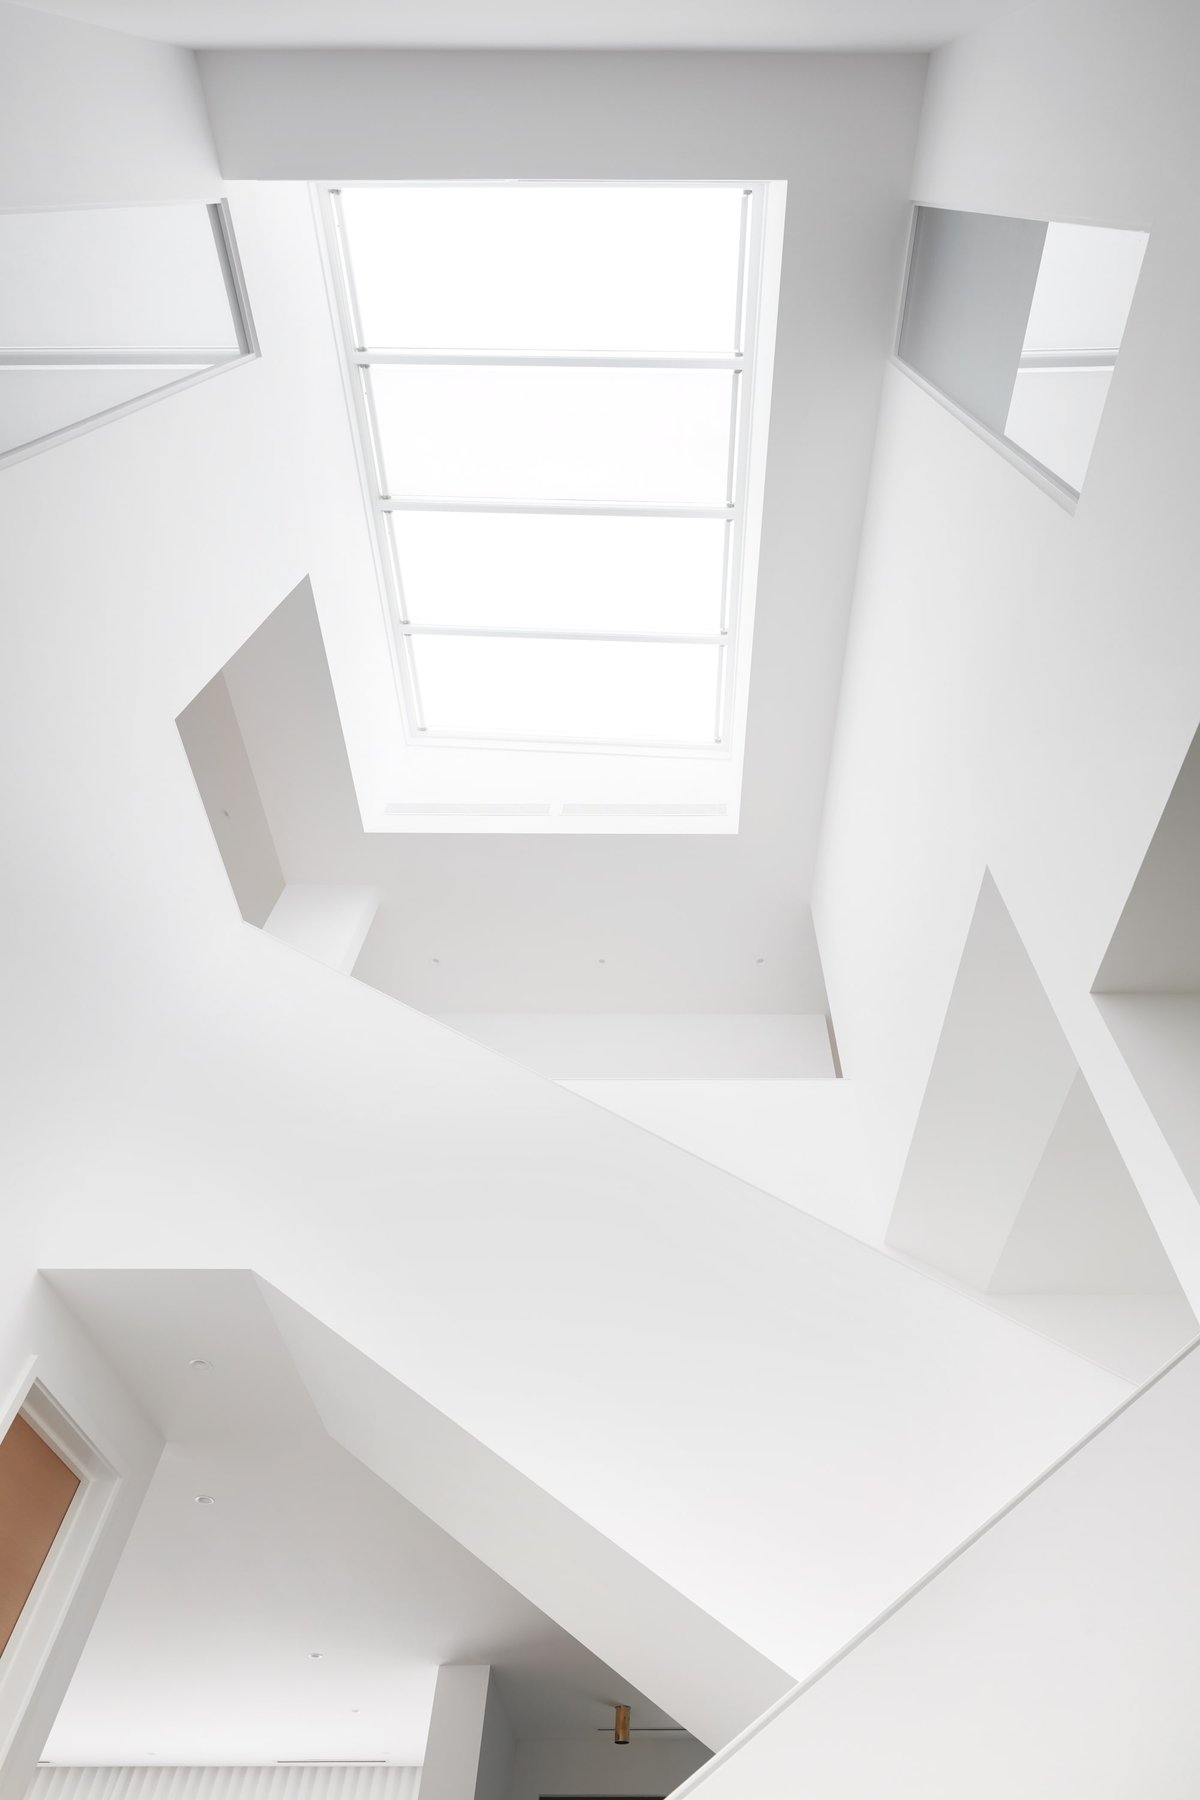 View of skylight from interior with contemporary architecture in Toronto